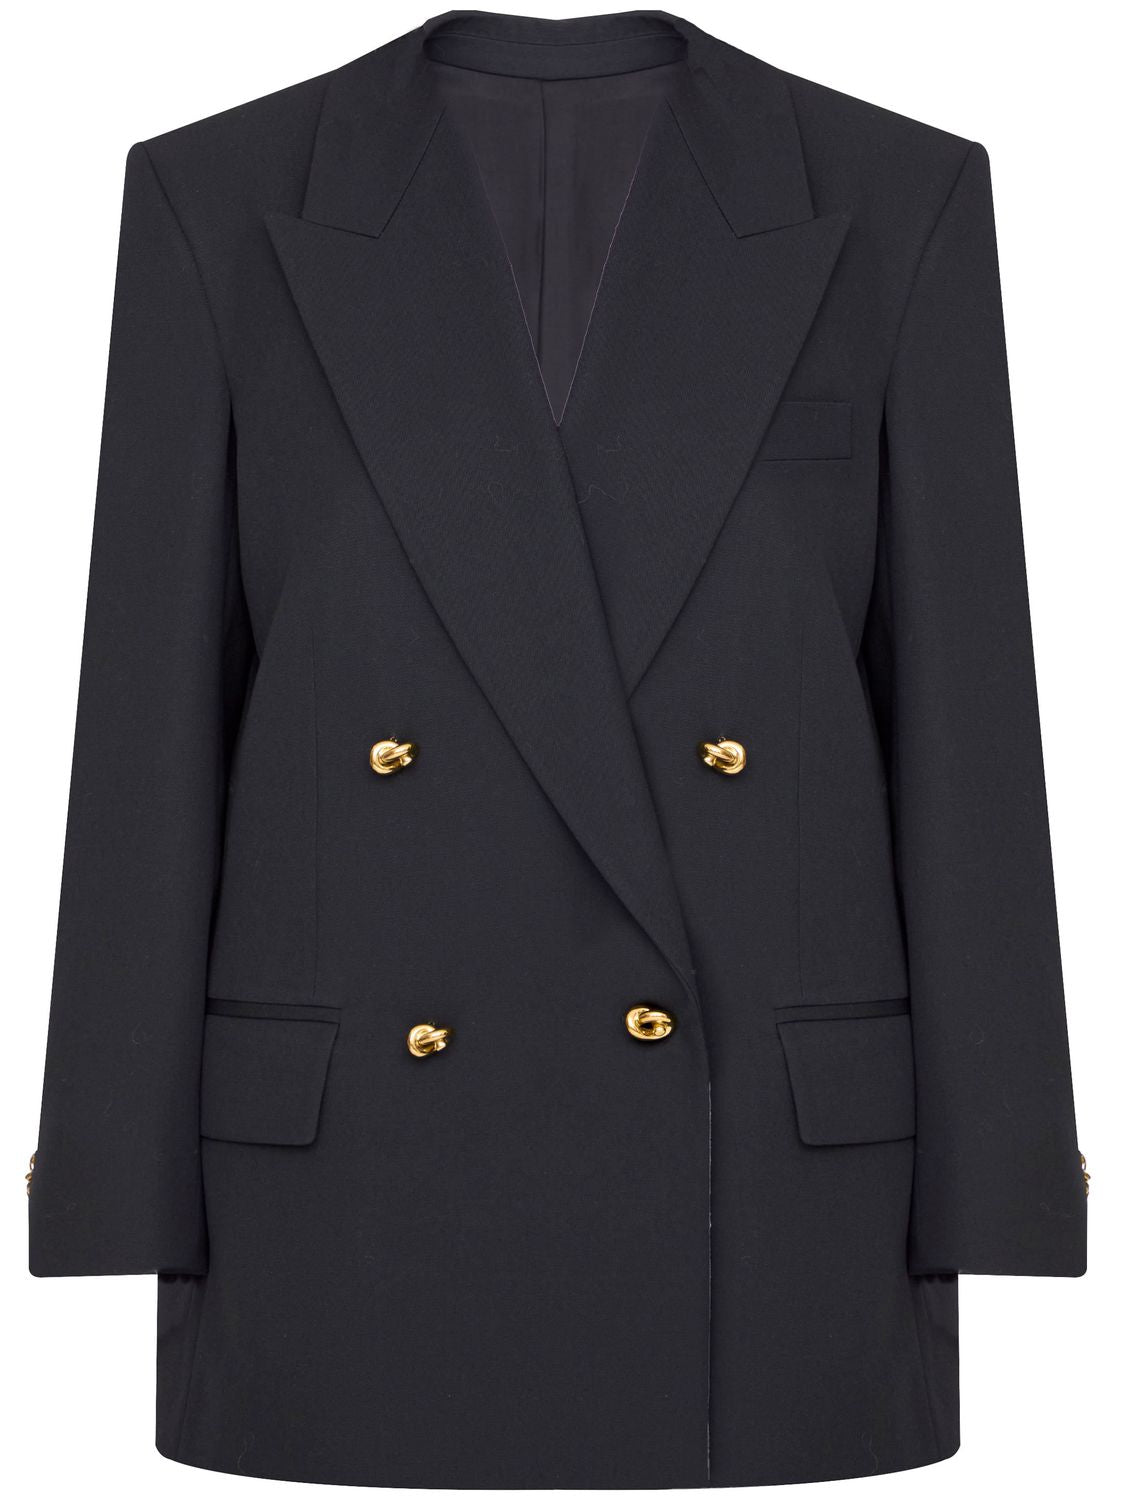 Knot Button Double-Breasted Jacket - Black Wool, Women's Outerwear